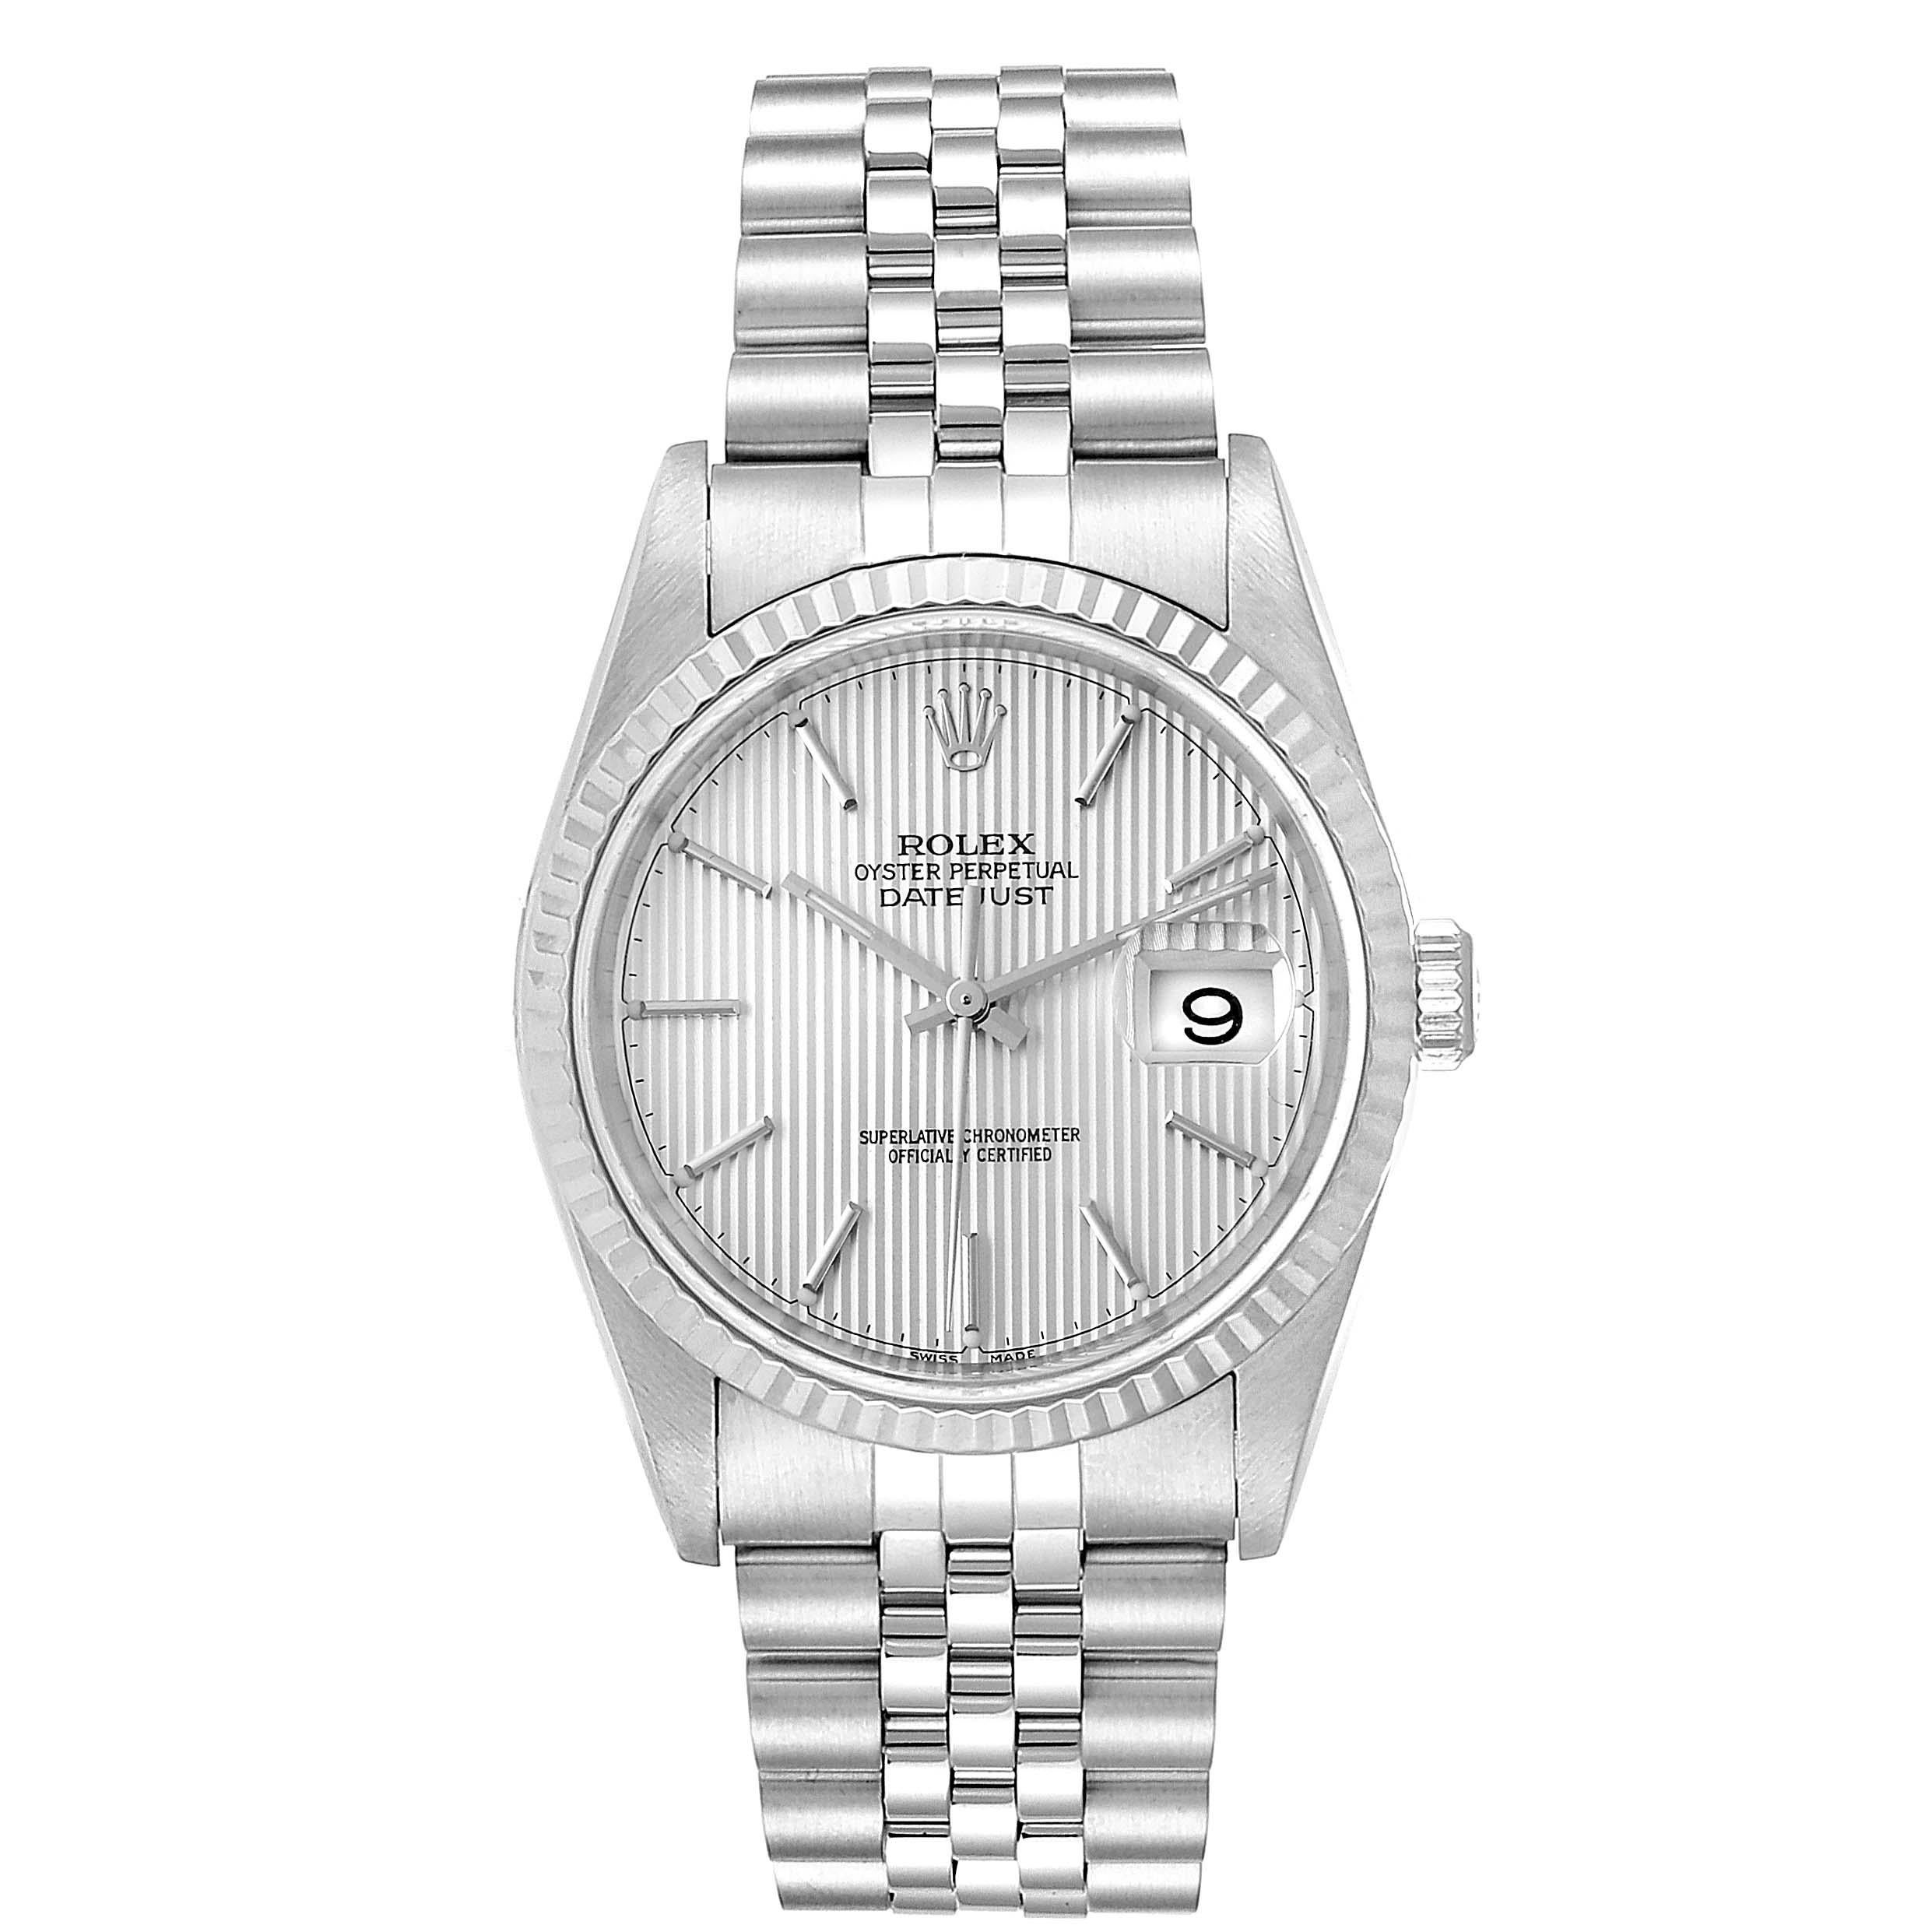 Rolex Datejust 36 Steel White Gold Tapestry Dial Mens Watch 16234. Officially certified chronometer self-winding movement. Stainless steel oyster case 36 mm in diameter. Rolex logo on a crown. 18k white gold fluted bezel. Scratch resistant sapphire